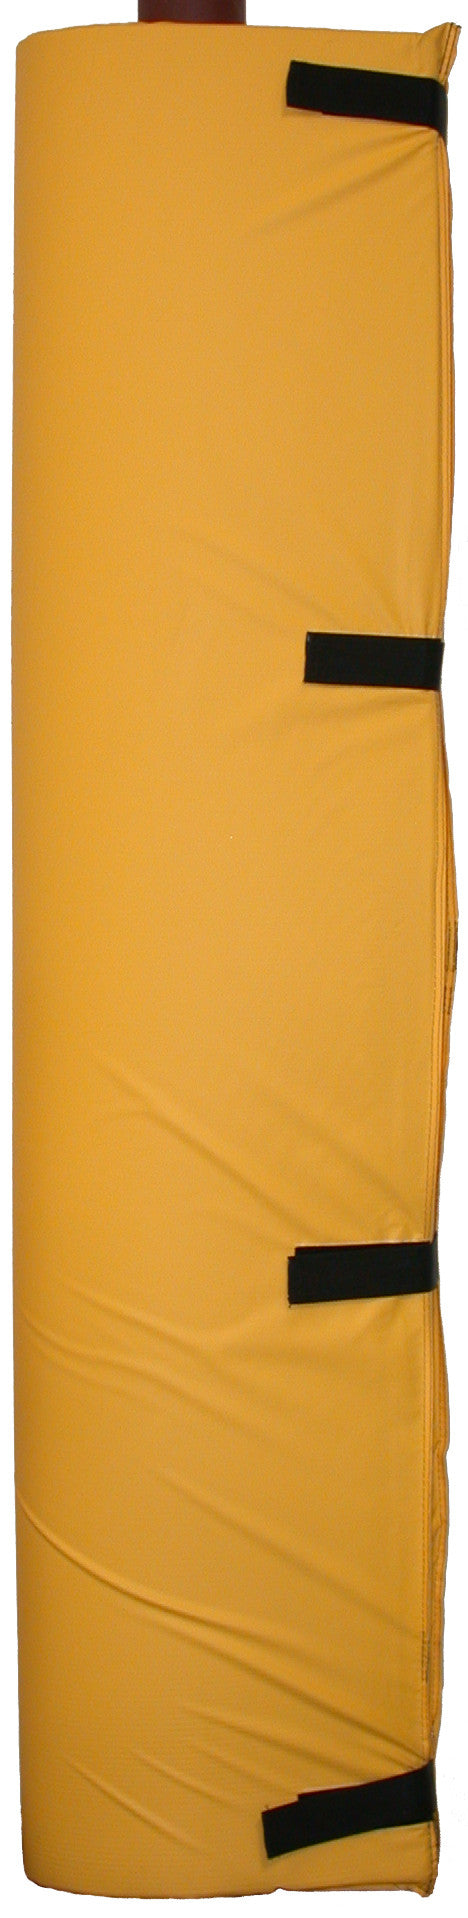 PADY-yellow vinyl cover post pad polyfoam filled